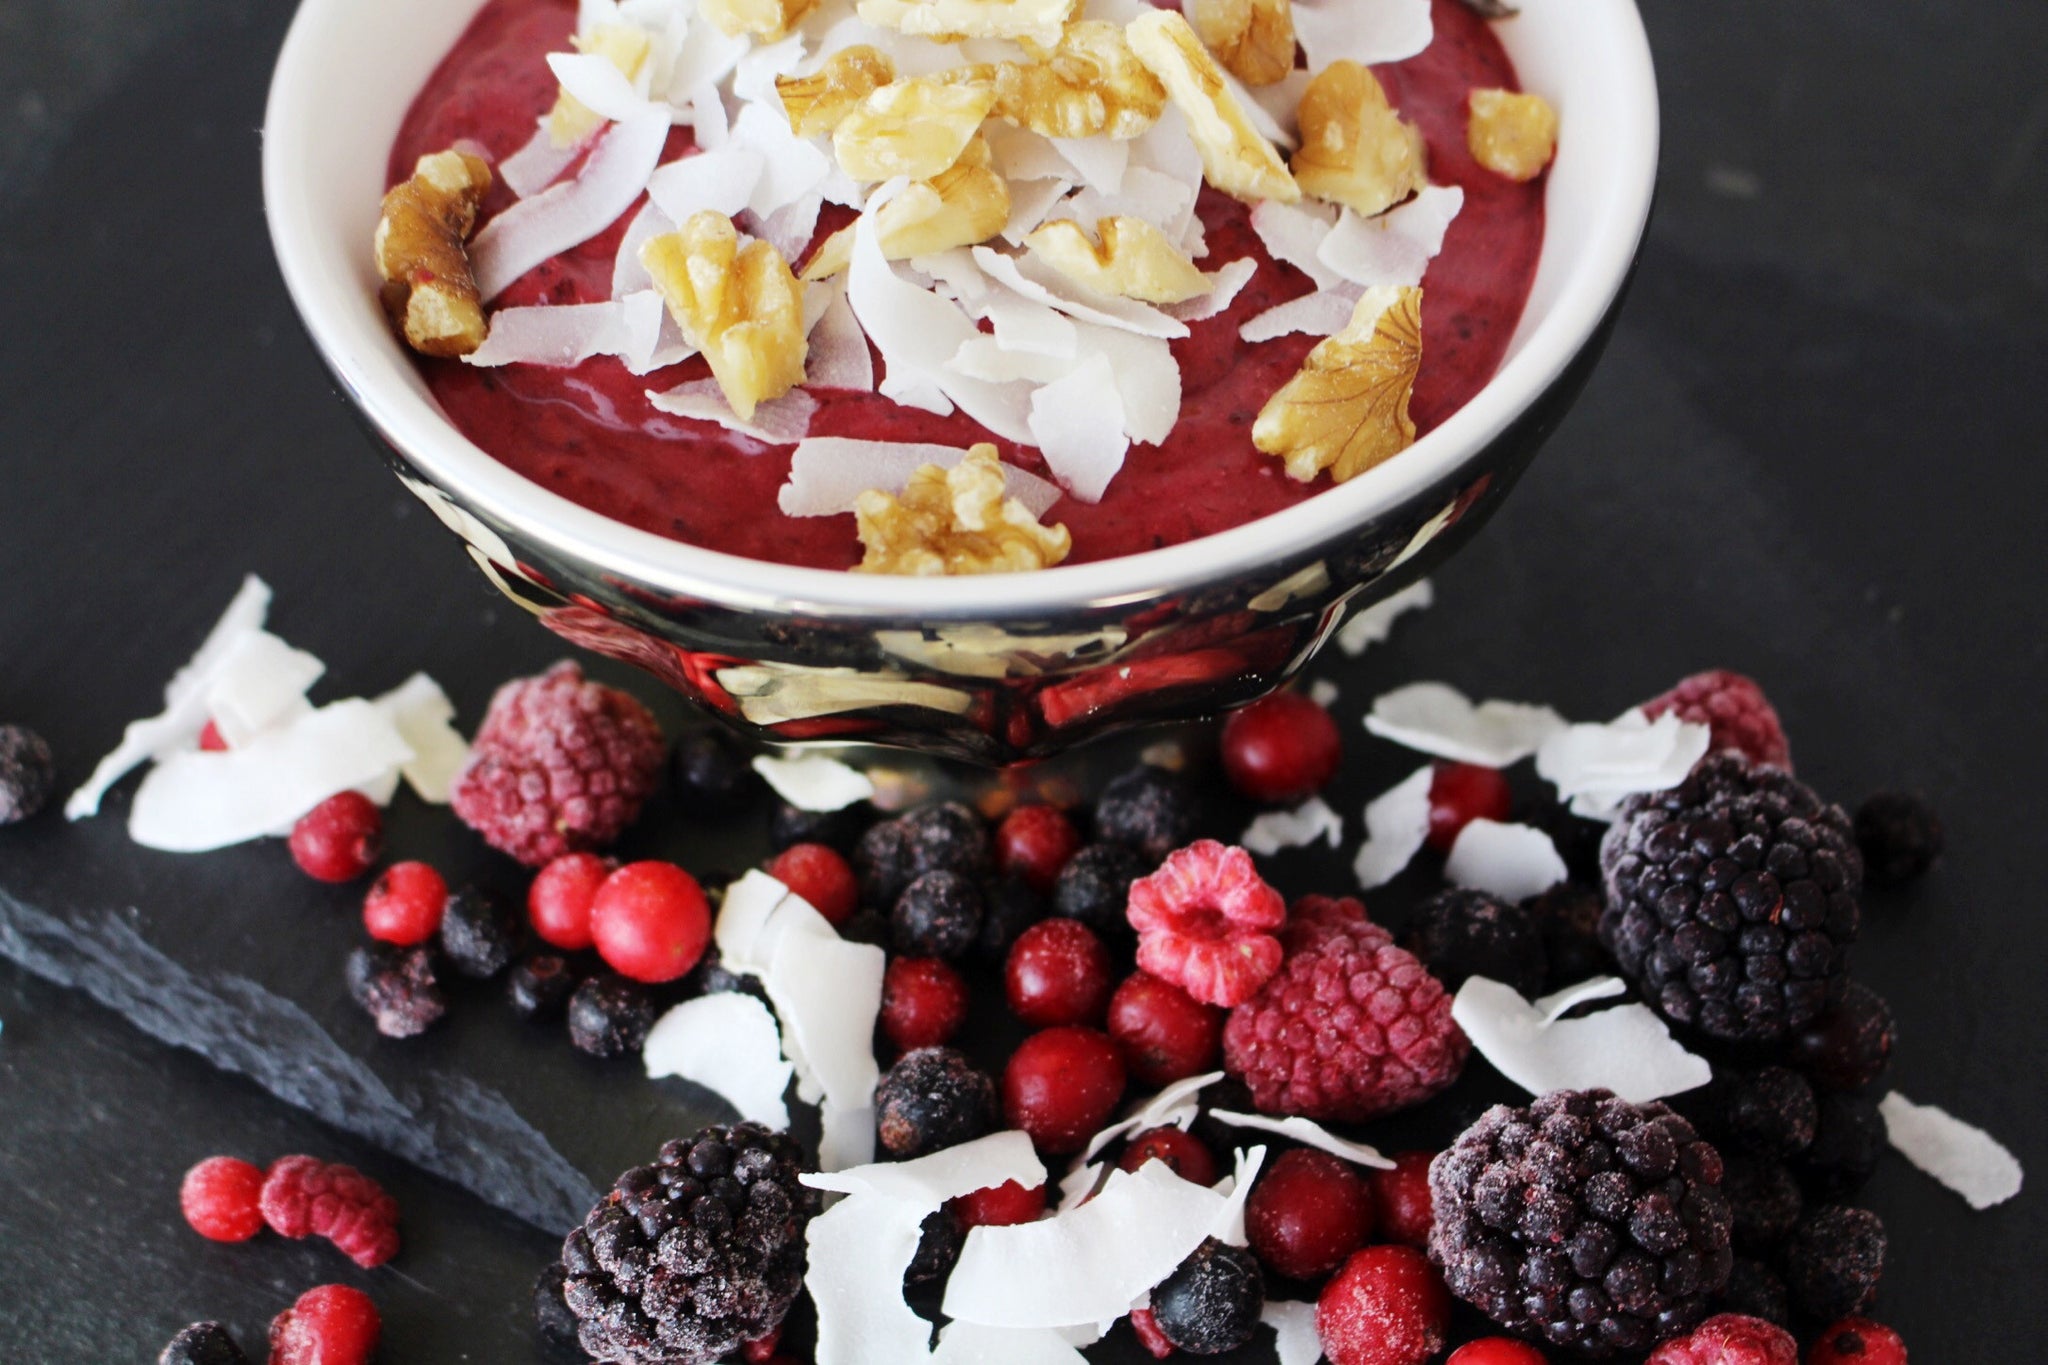 Triple berry smoothie in a bowl surrounded by fruit